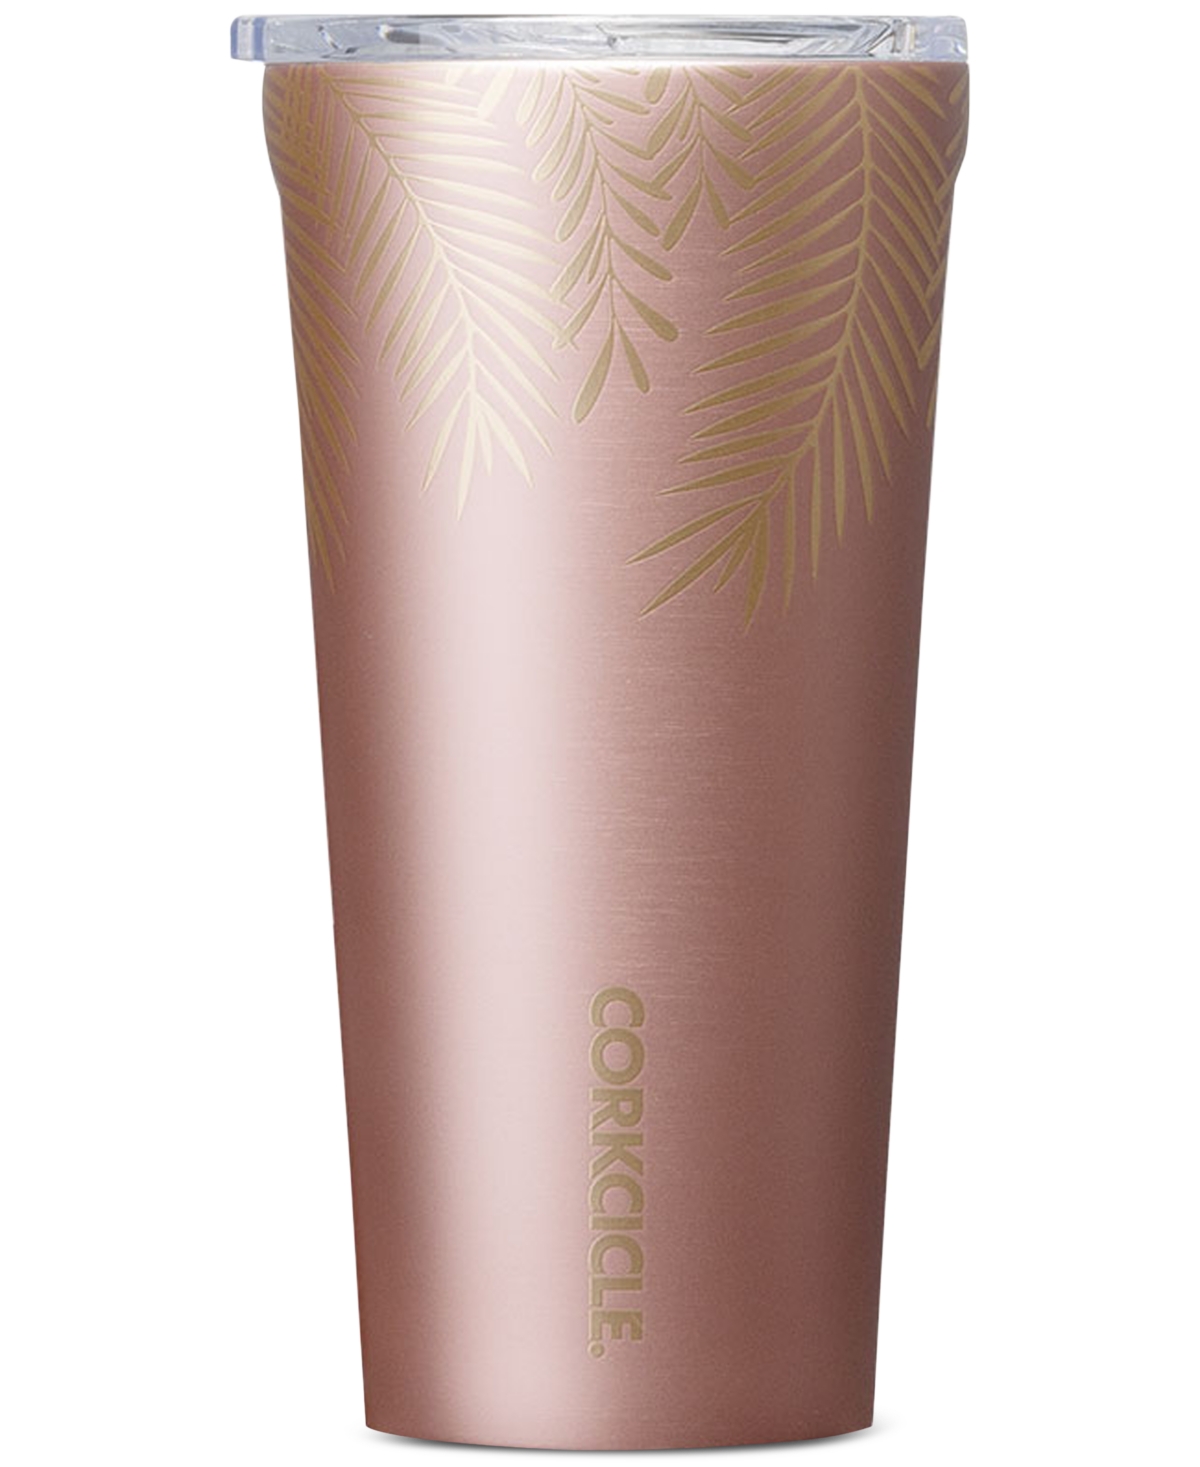 Corkcicle Frosted Pines Rose Gold Tumbler Stainless Steel 16-oz. Tumbler